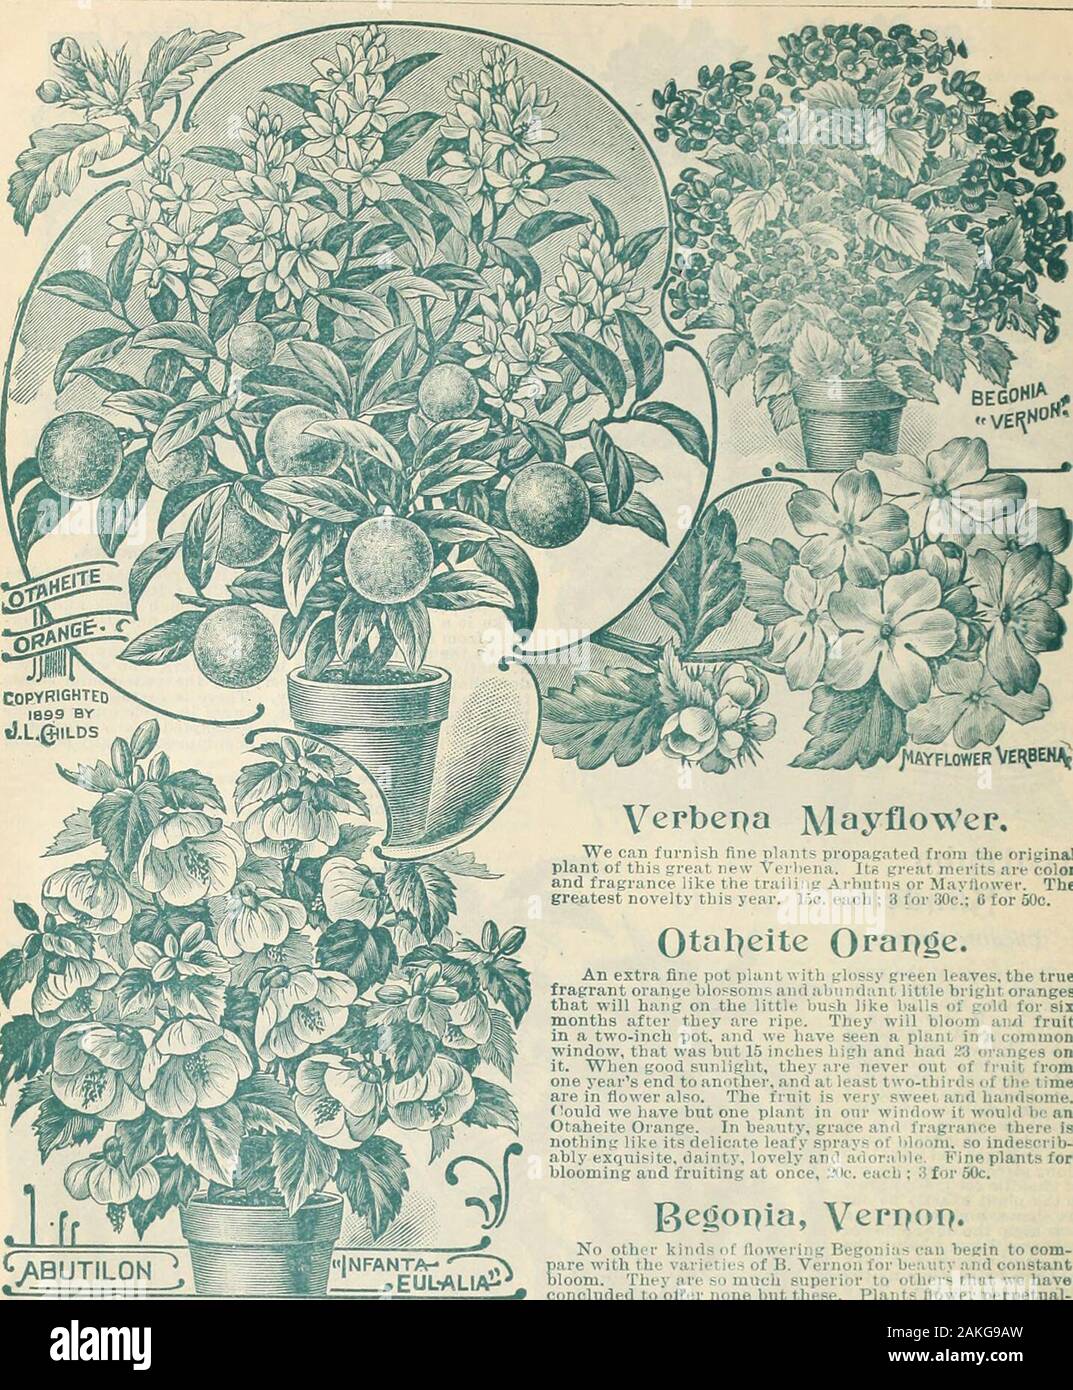 Childs' fall catalogue of bulbs and plants that bloom . ACALYPHA ad8. Sahderi !Pnt. »? 40. Mayflower Ve^beh NeV Abiitilops. Unlike the ordinary Abutilons of scraggy growth, theyare very compact and short jointed, makinga neut pot plant.The flowers are the most beautiful we have seen amongAbutilons, being very large yet short and beautifully cuppedand of the most lovely colors. It is safe to say that thesevarieties will produce five times as much bloom as others.Infanta Eulalla—This is perfection itself. Plants dwarf and short jointed, producing exquisite large cupped blossoms by the score fr Stock Photo